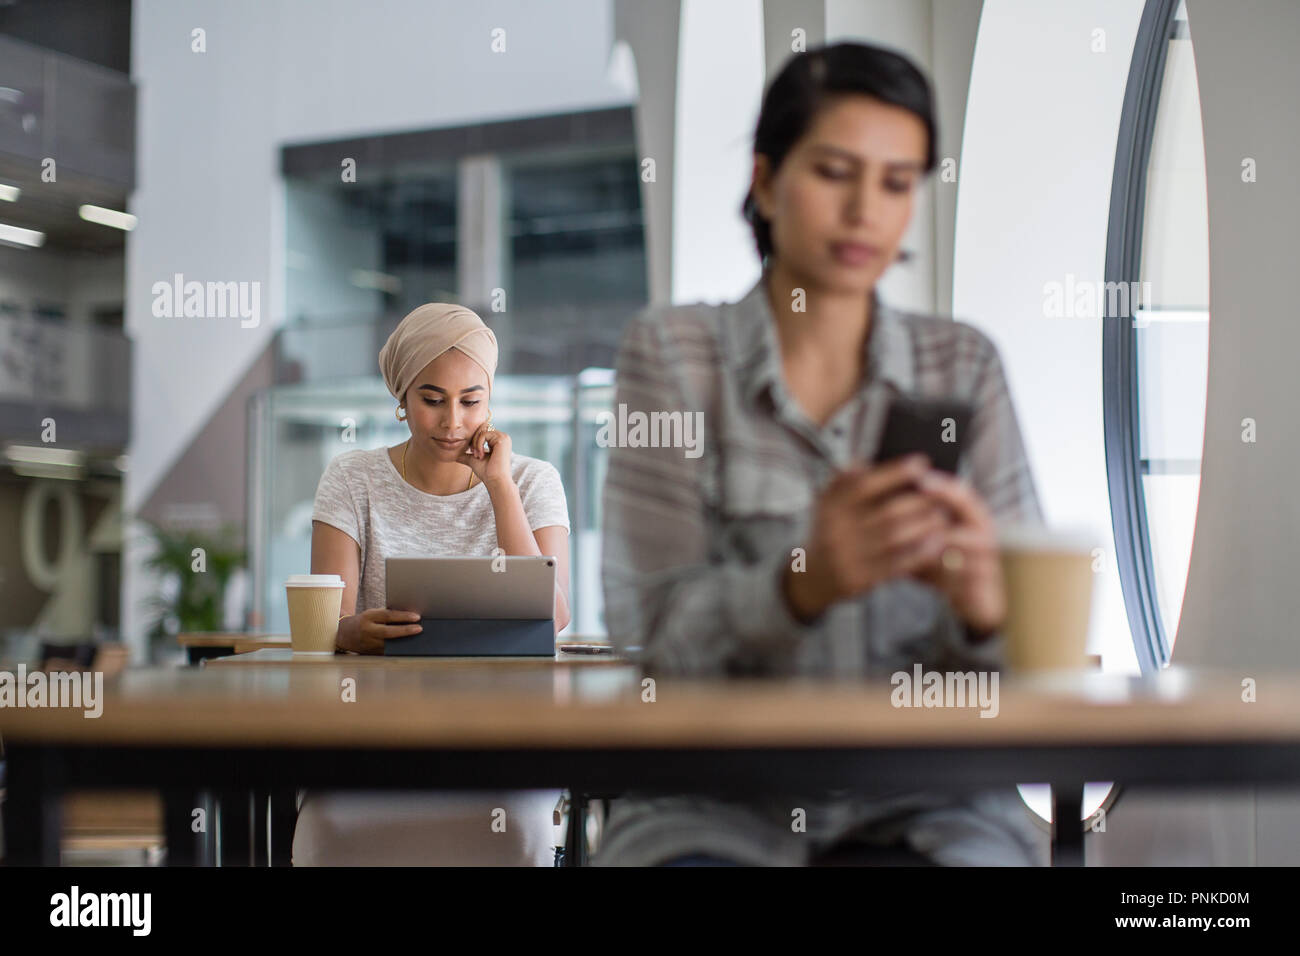 Muslim businesswoman using a digital tablet in a cafe Stock Photo